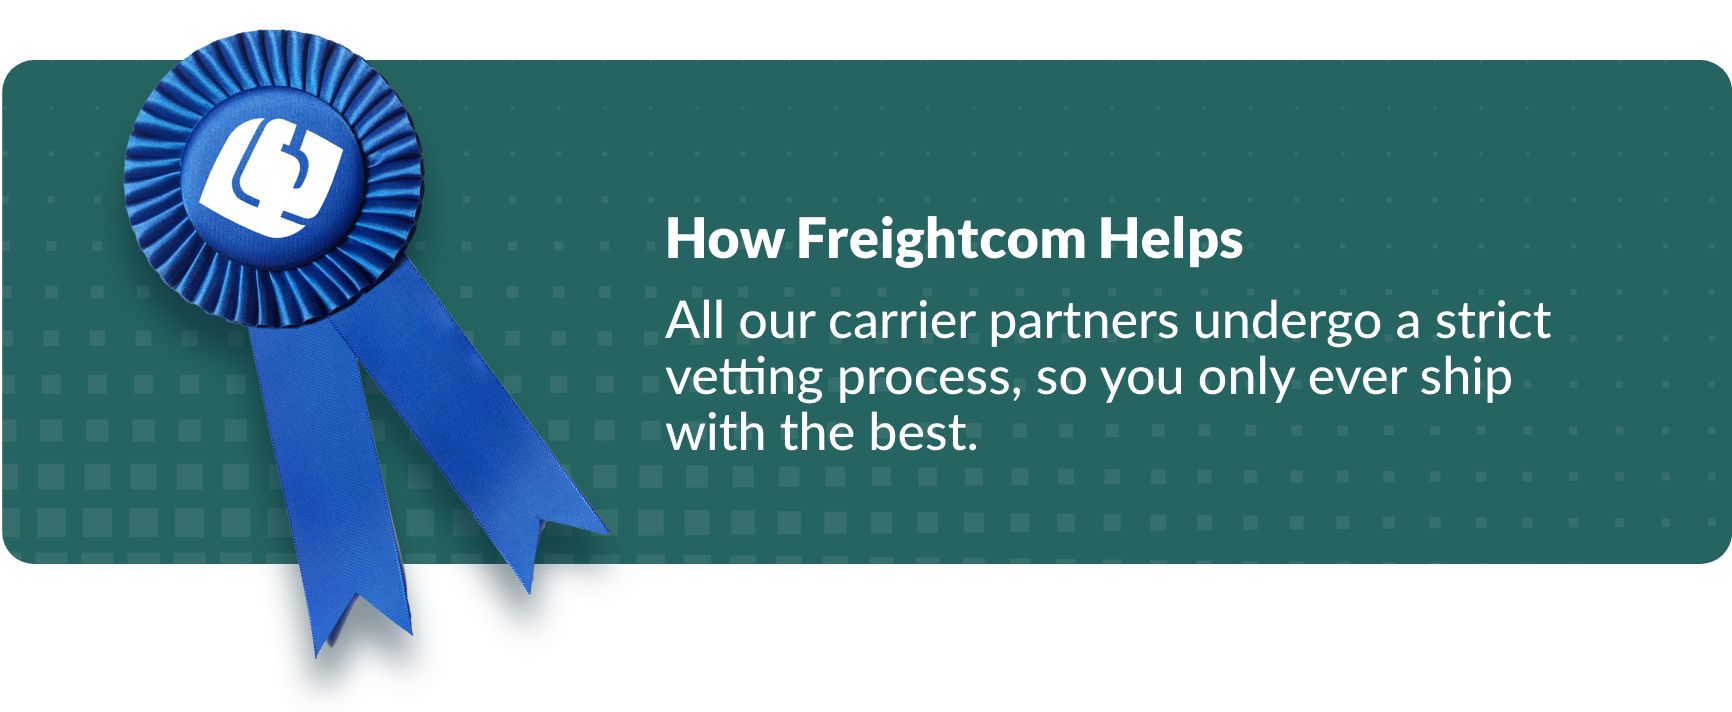 strict-vetting-of-carrier-partners-Freightcom